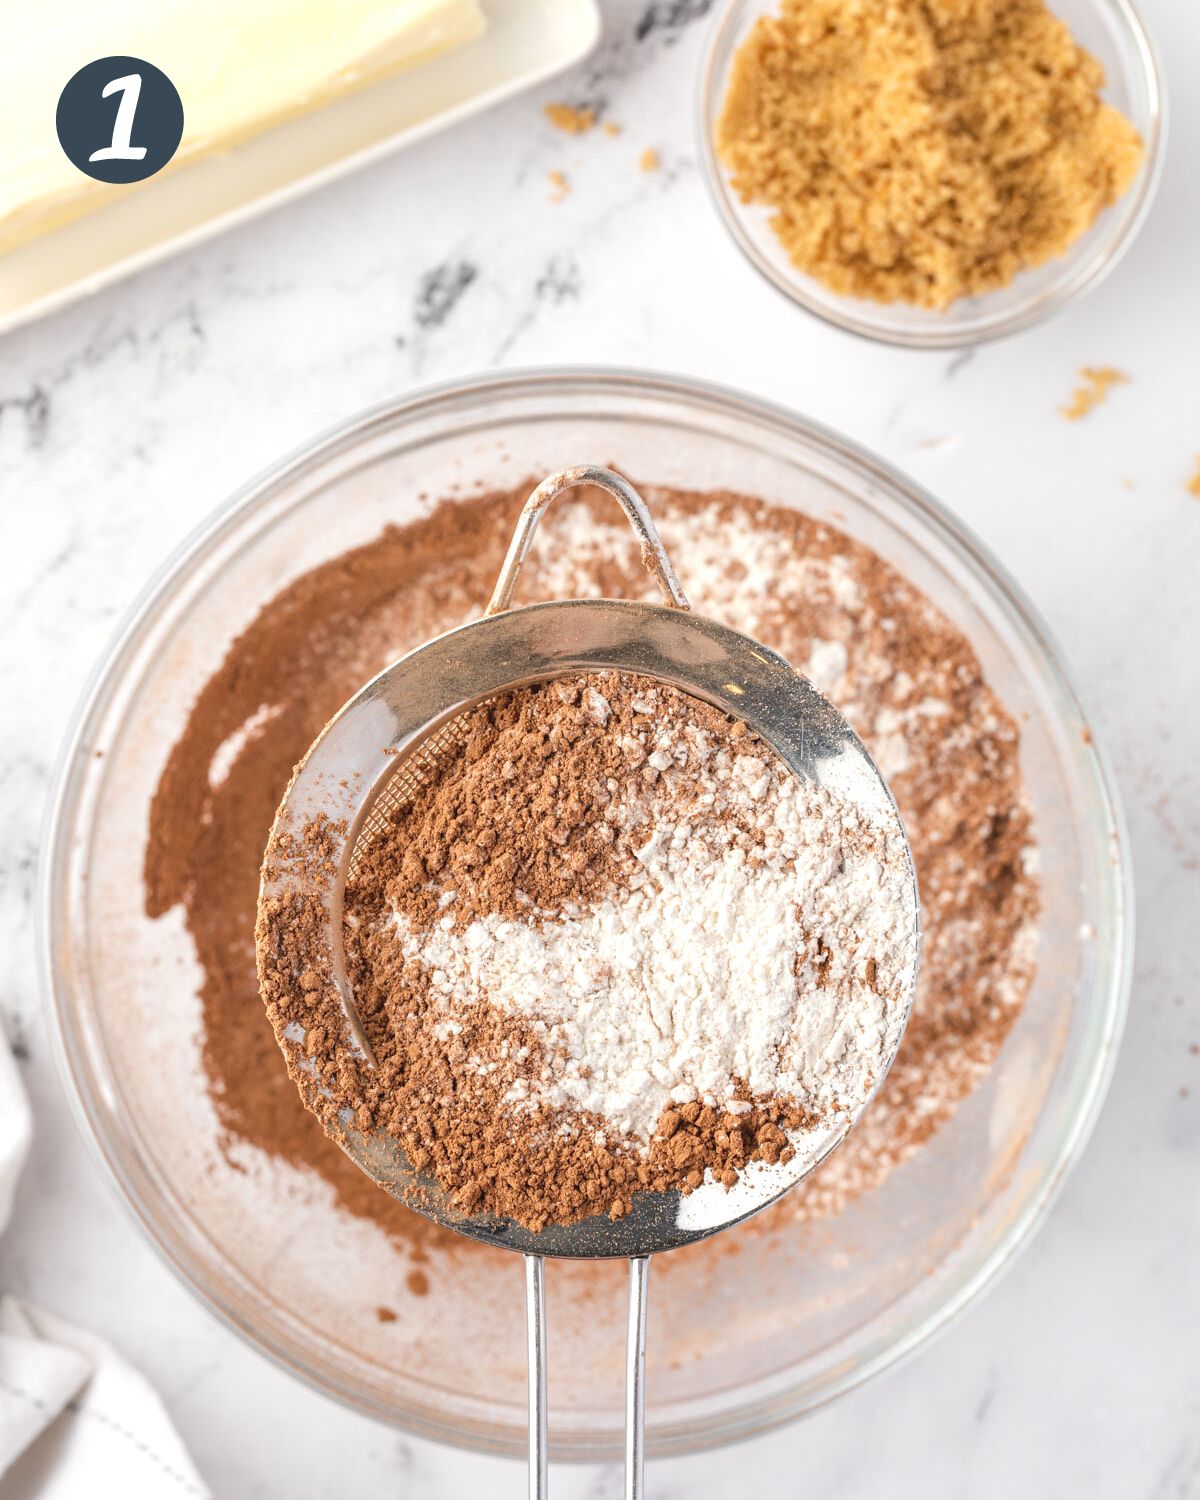 Cocoa powder and flour in a sifter over a bowl.